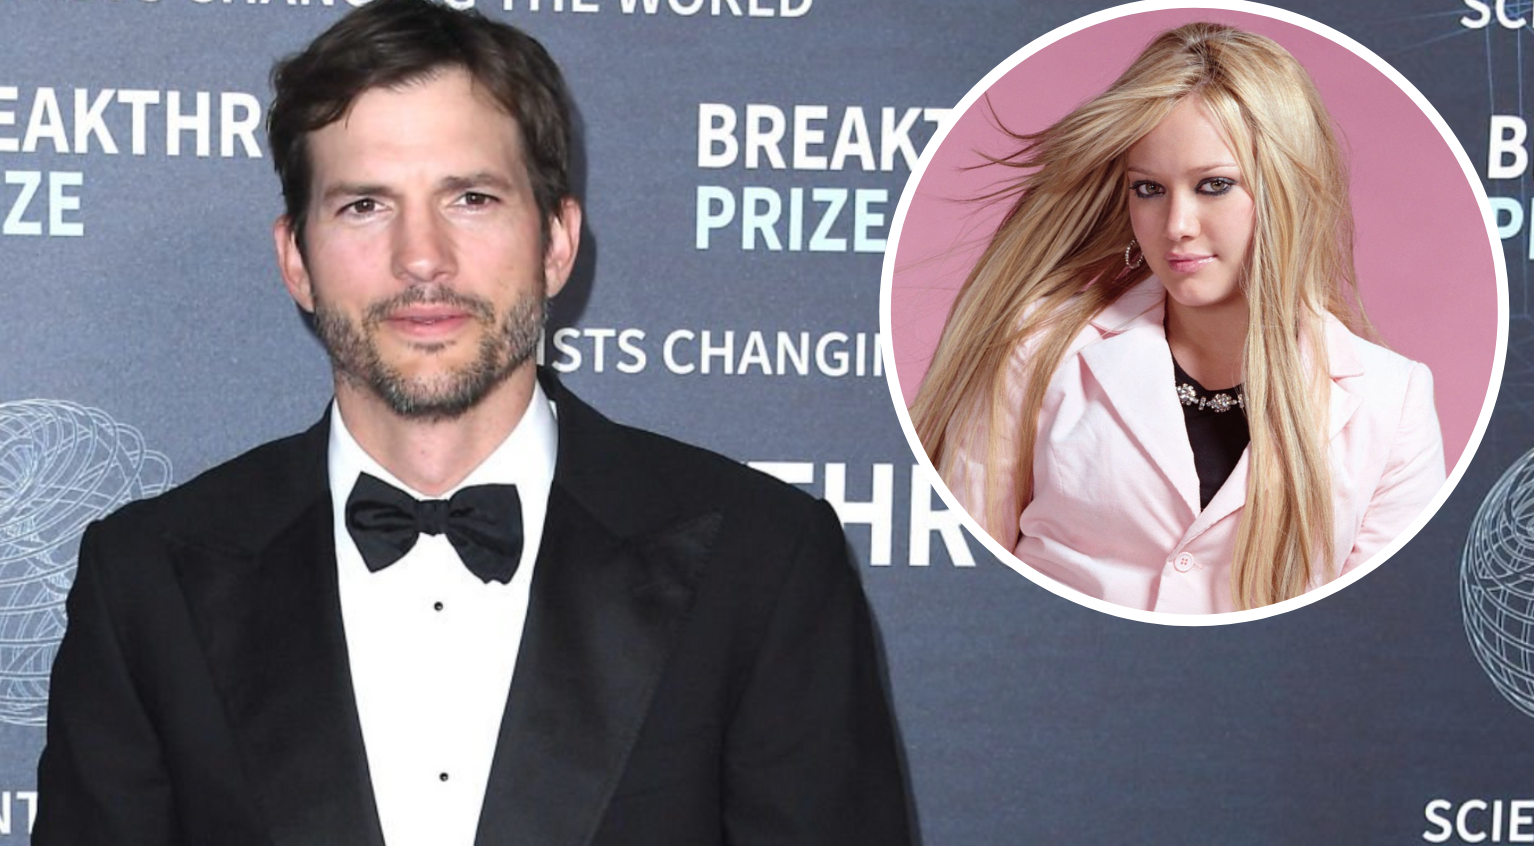 You are currently viewing Ashton Kutcher’s nasty comments about Hilary Duff that could end her career